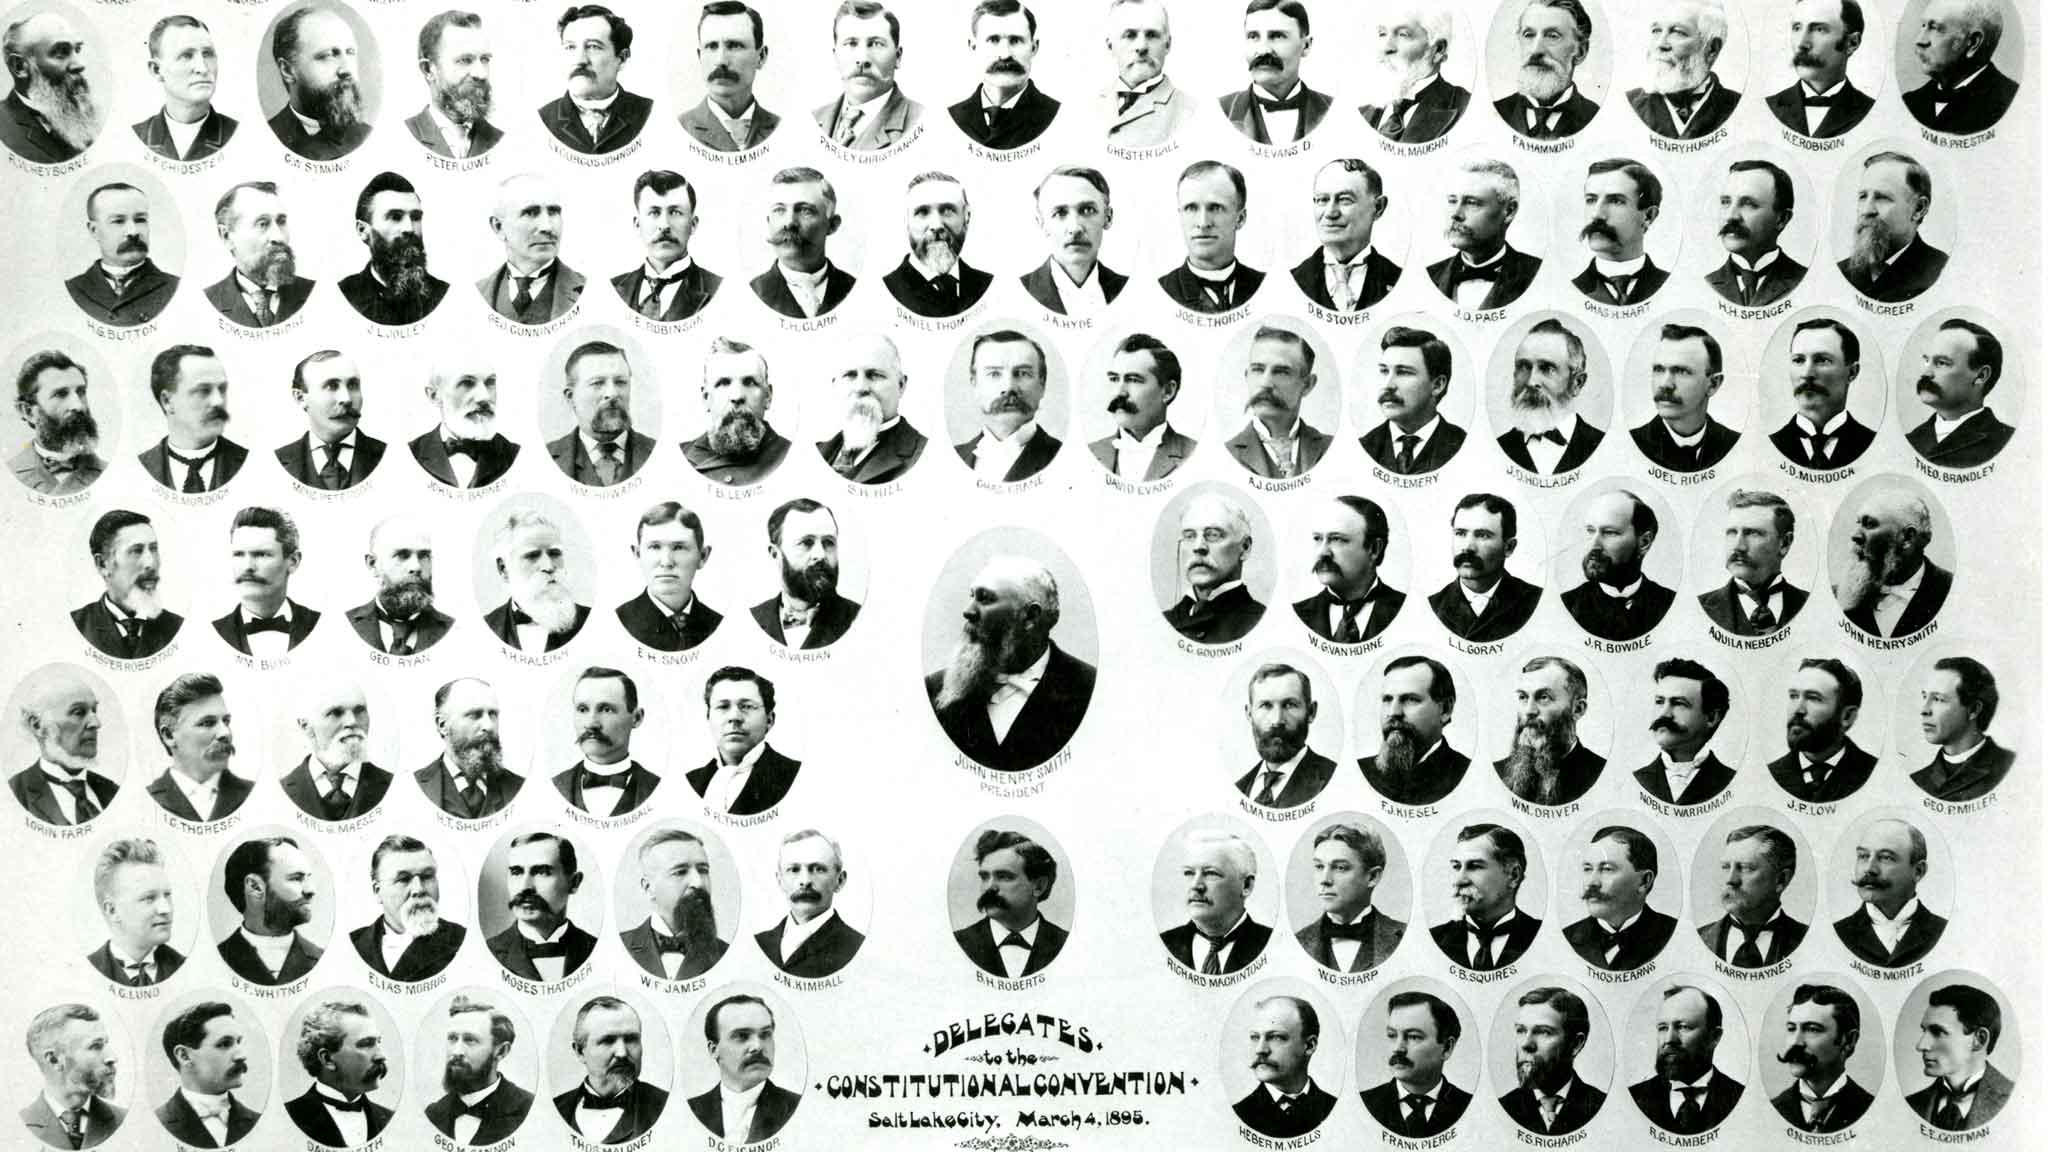 Convention - image